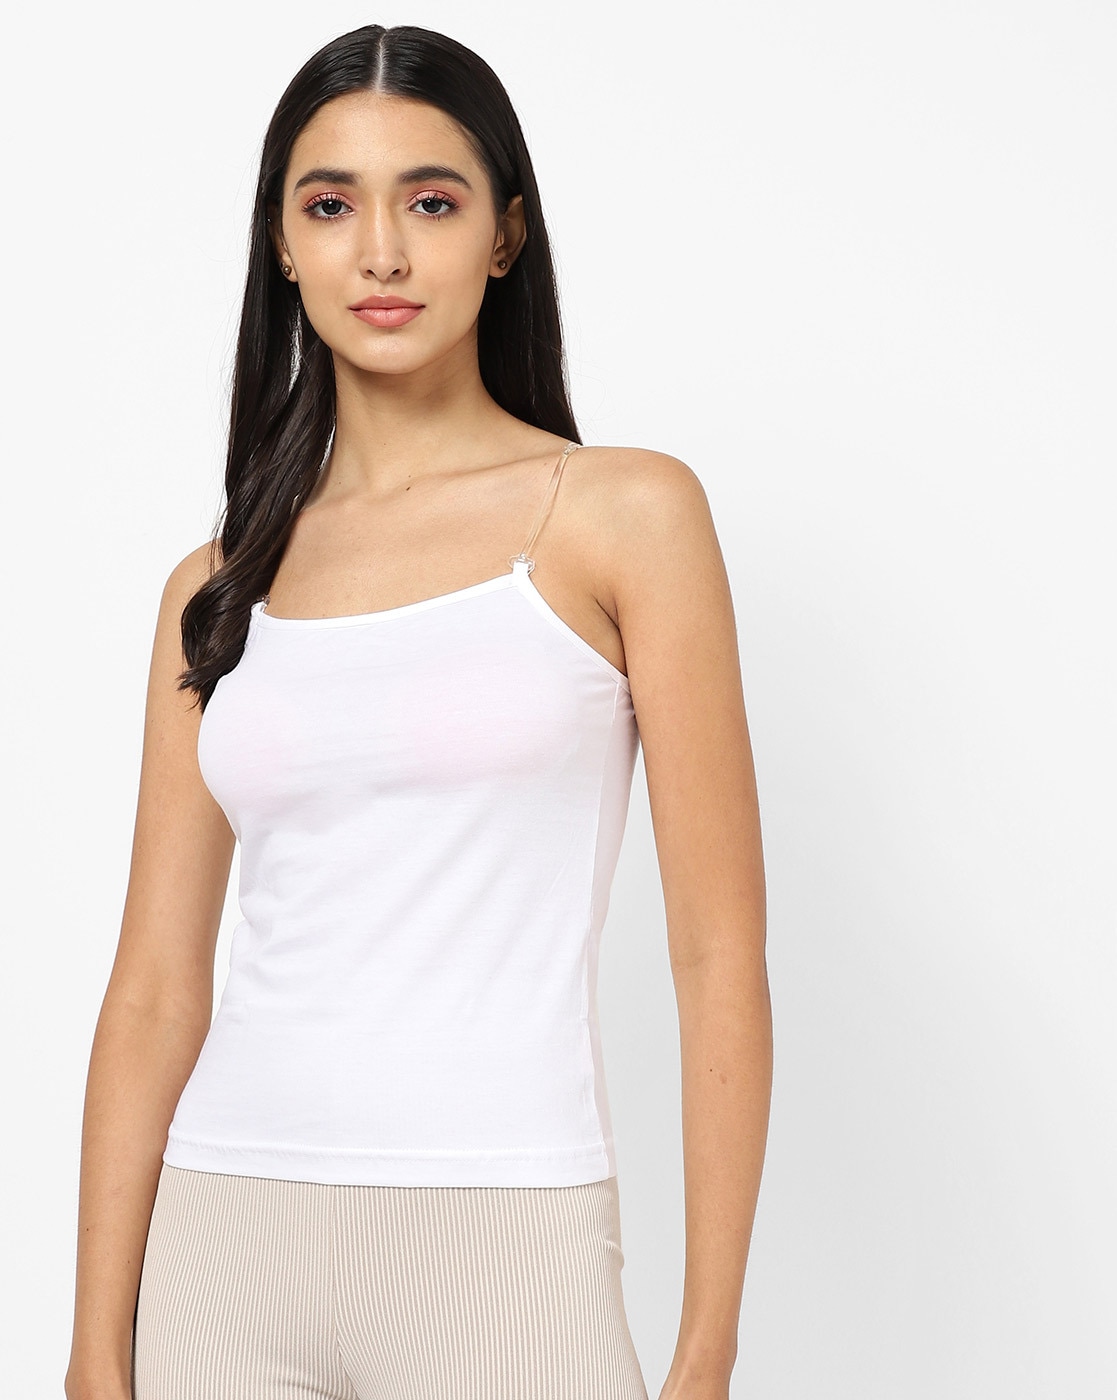 Buy Mesua Ferrea Cotton Regular Non-Padded Camisole Slip/Cami with  Adjustable Detachable Strap for Girls/Women - Free Transparent Strap  (White, XL) - Lowest price in India